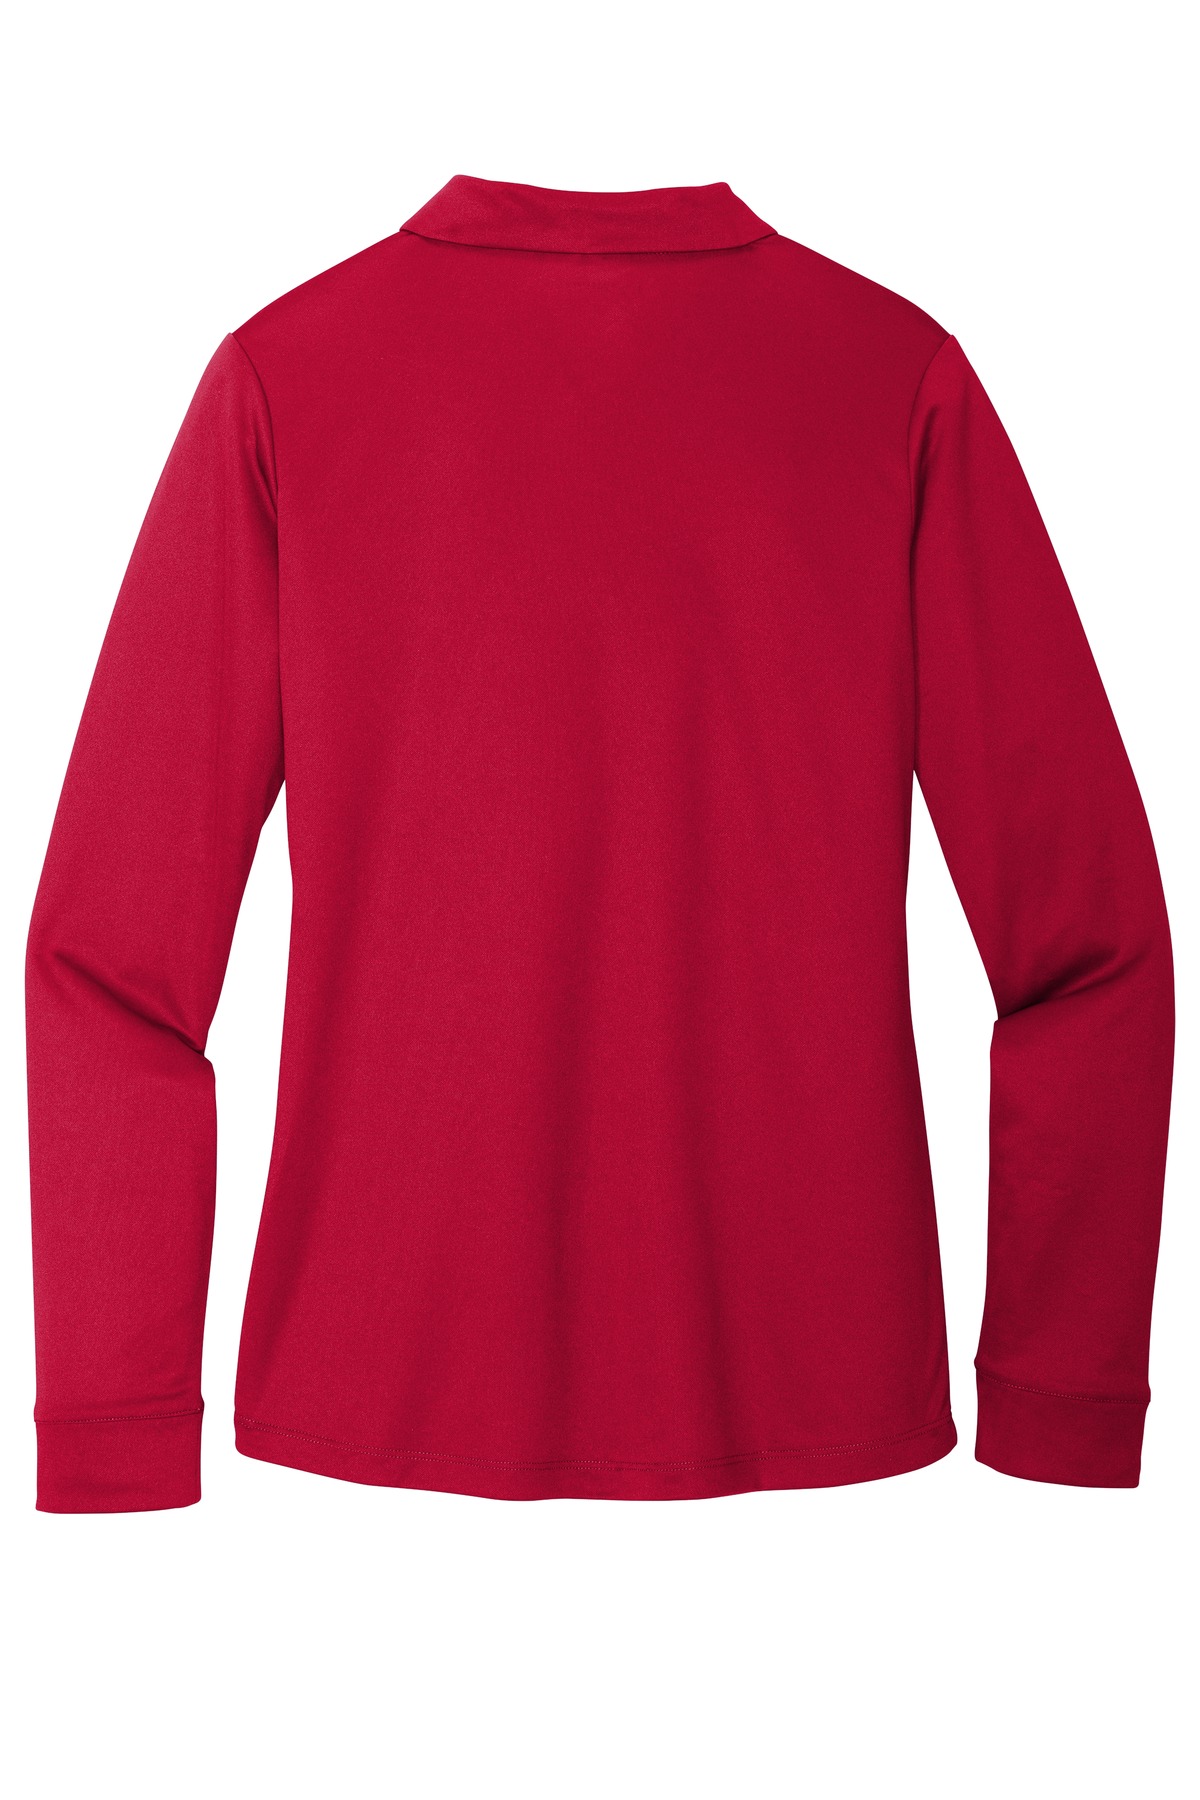 Port Authority Adult Female Women Y-neck Plain Long Sleeves Polo Red Medium - image 4 of 4